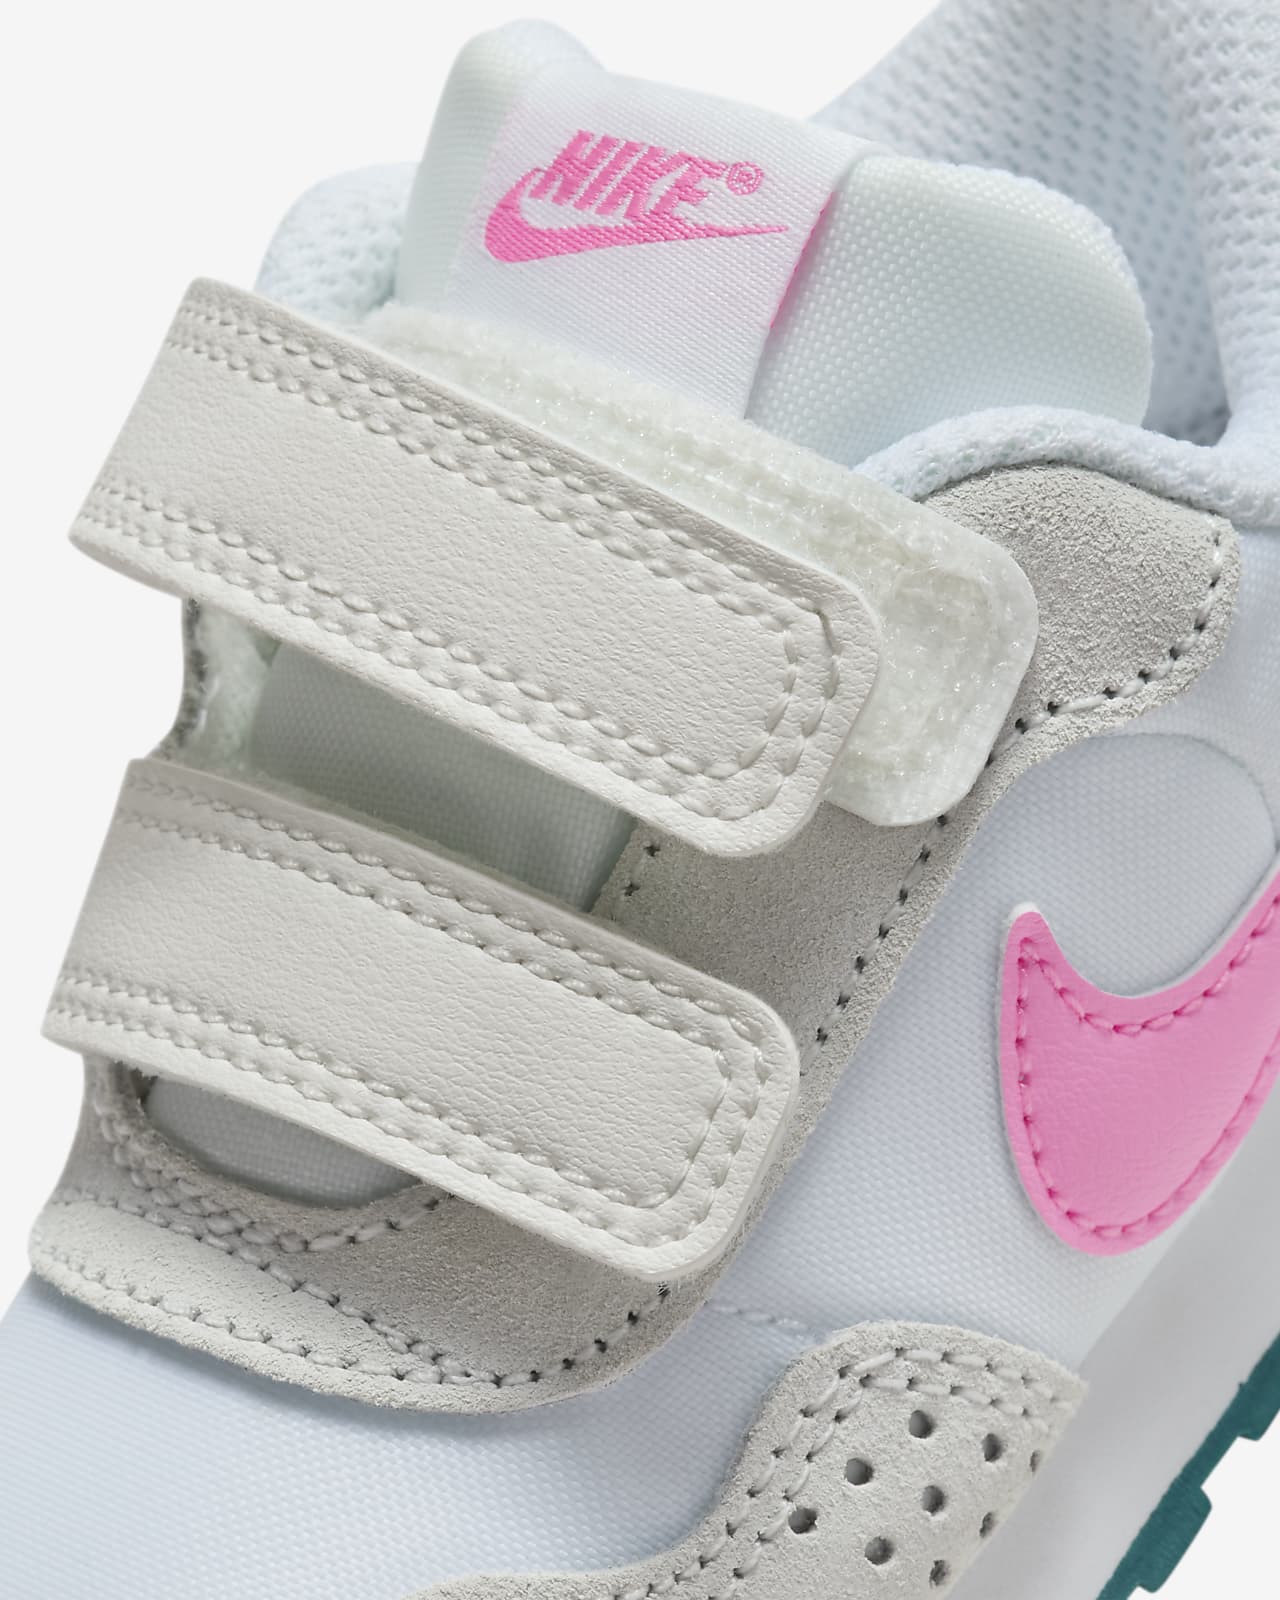 Baby Shoe. and Nike Nike ID MD Valiant Toddler